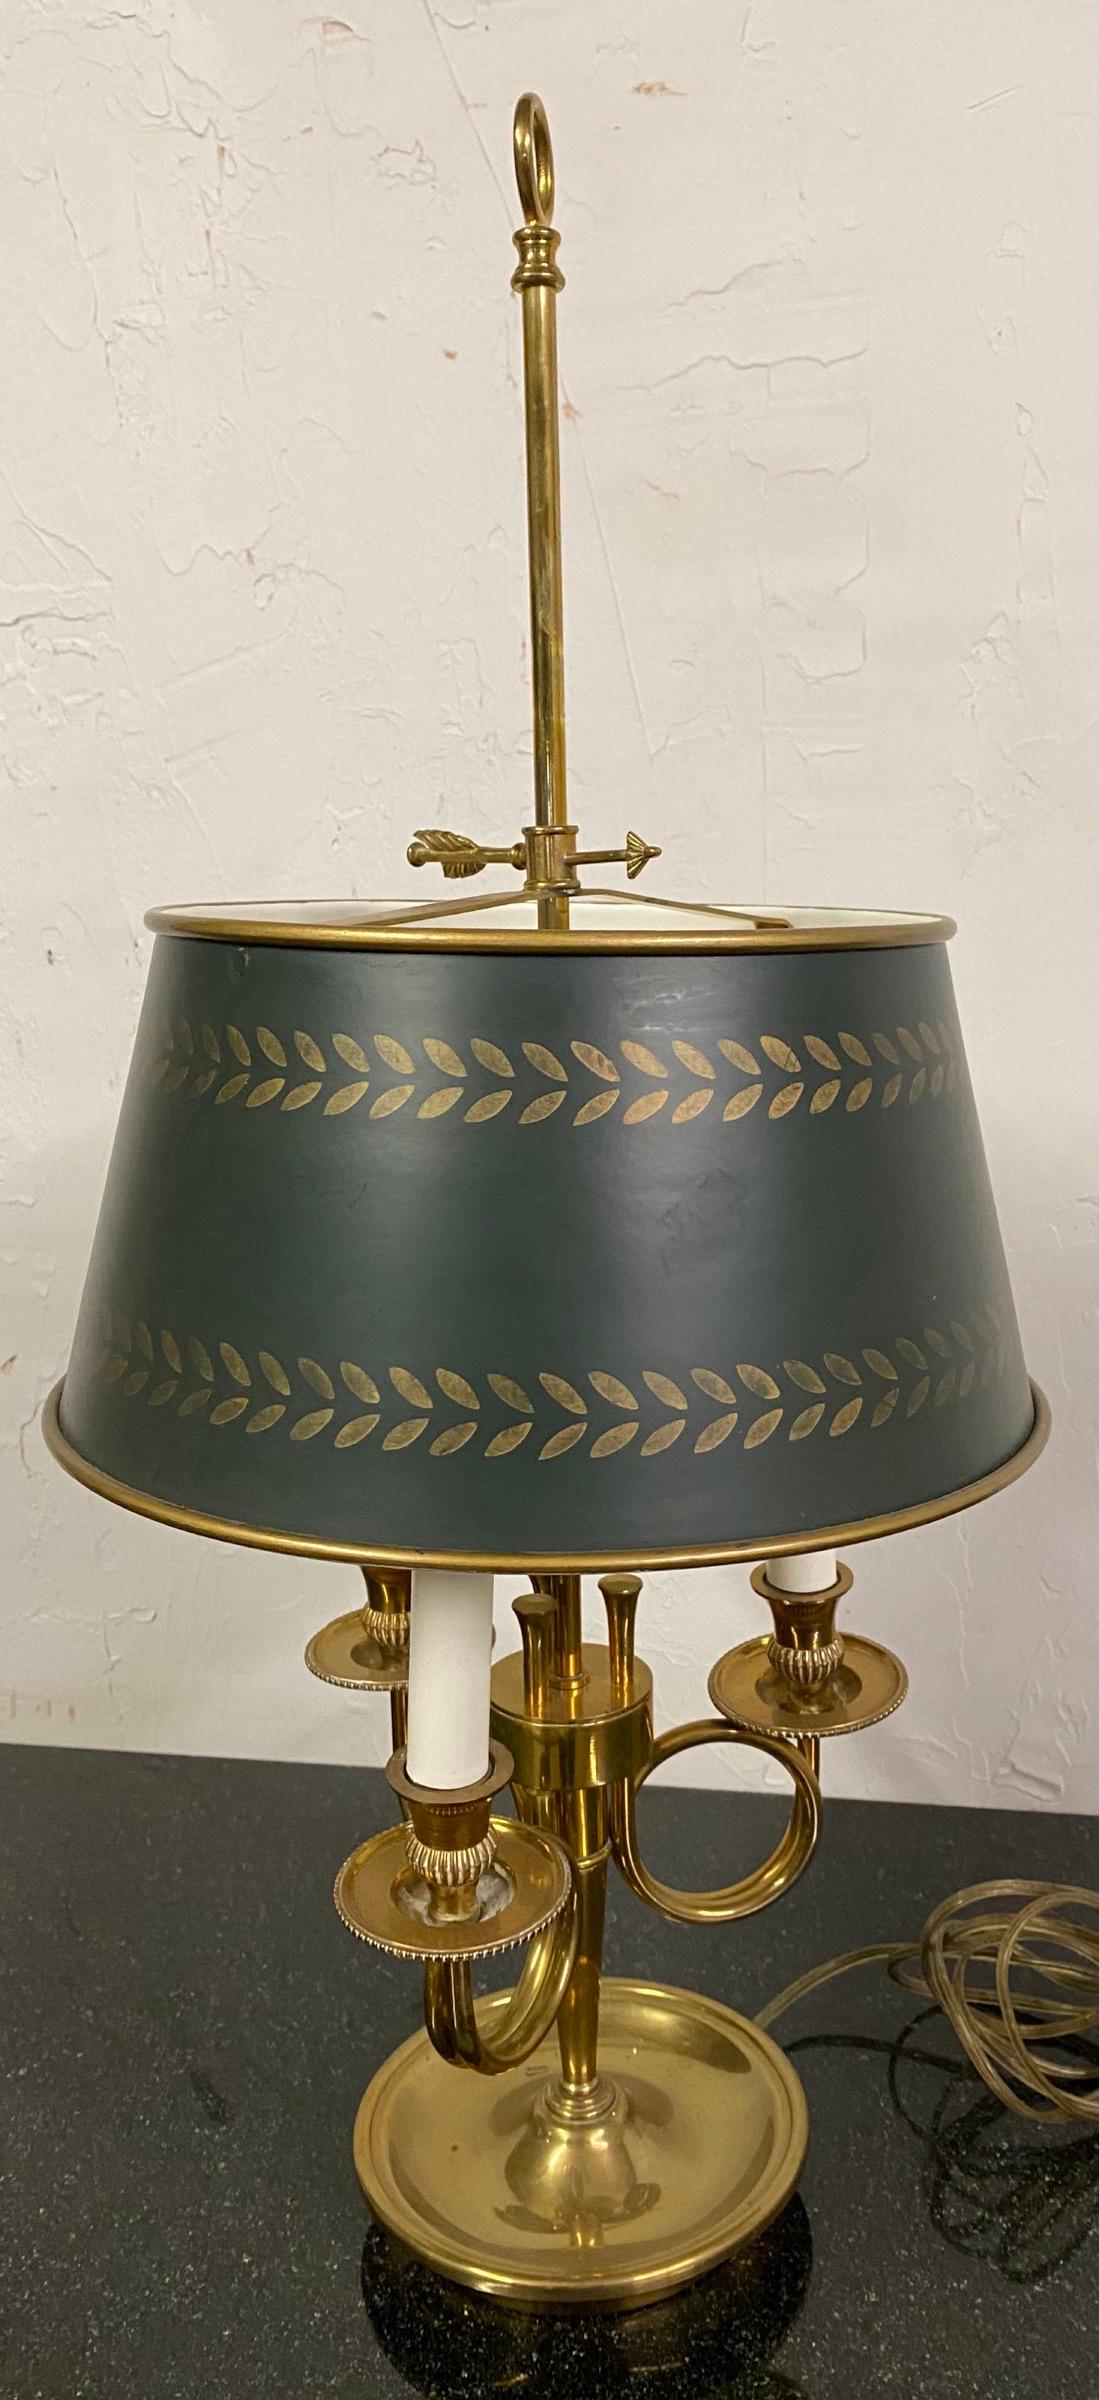 This fine and elegant classic Louis XVI style brass and hand-painted tole bouillotte lamp has three-lights. The toleware shade is hand painted with green enamel and gold decoration. Lamp shade can be adjusted to different heights with the